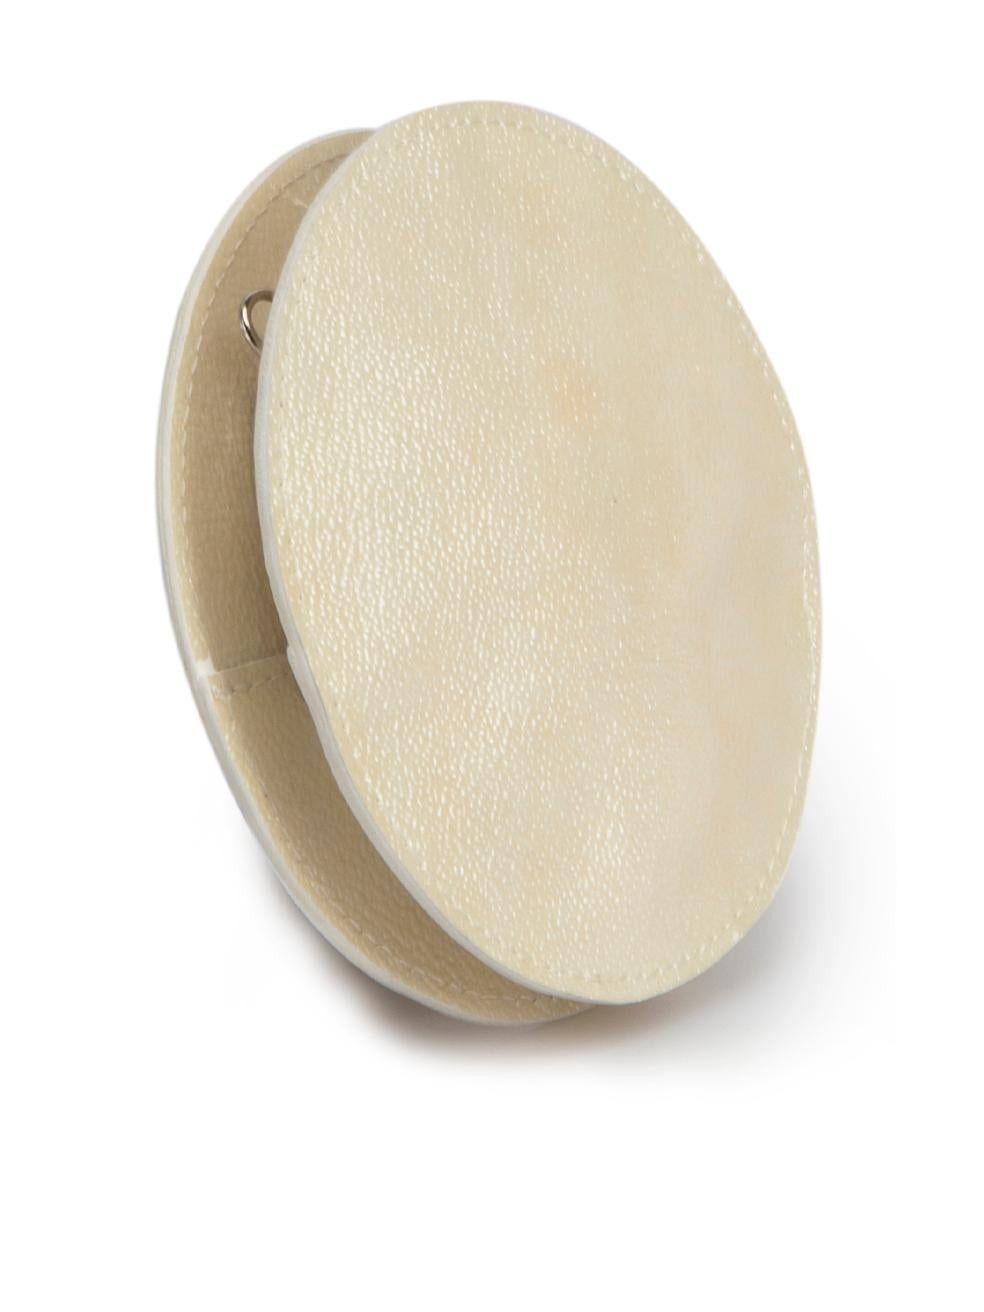 CONDITION is Never worn, with tags. Visible wear to purse is evident with discolouration to the stitching due to poor storage on this new Maison Martin Margiela designer resale item.



Details


Cream

Patent leather

Mini round coin pouch

Metal